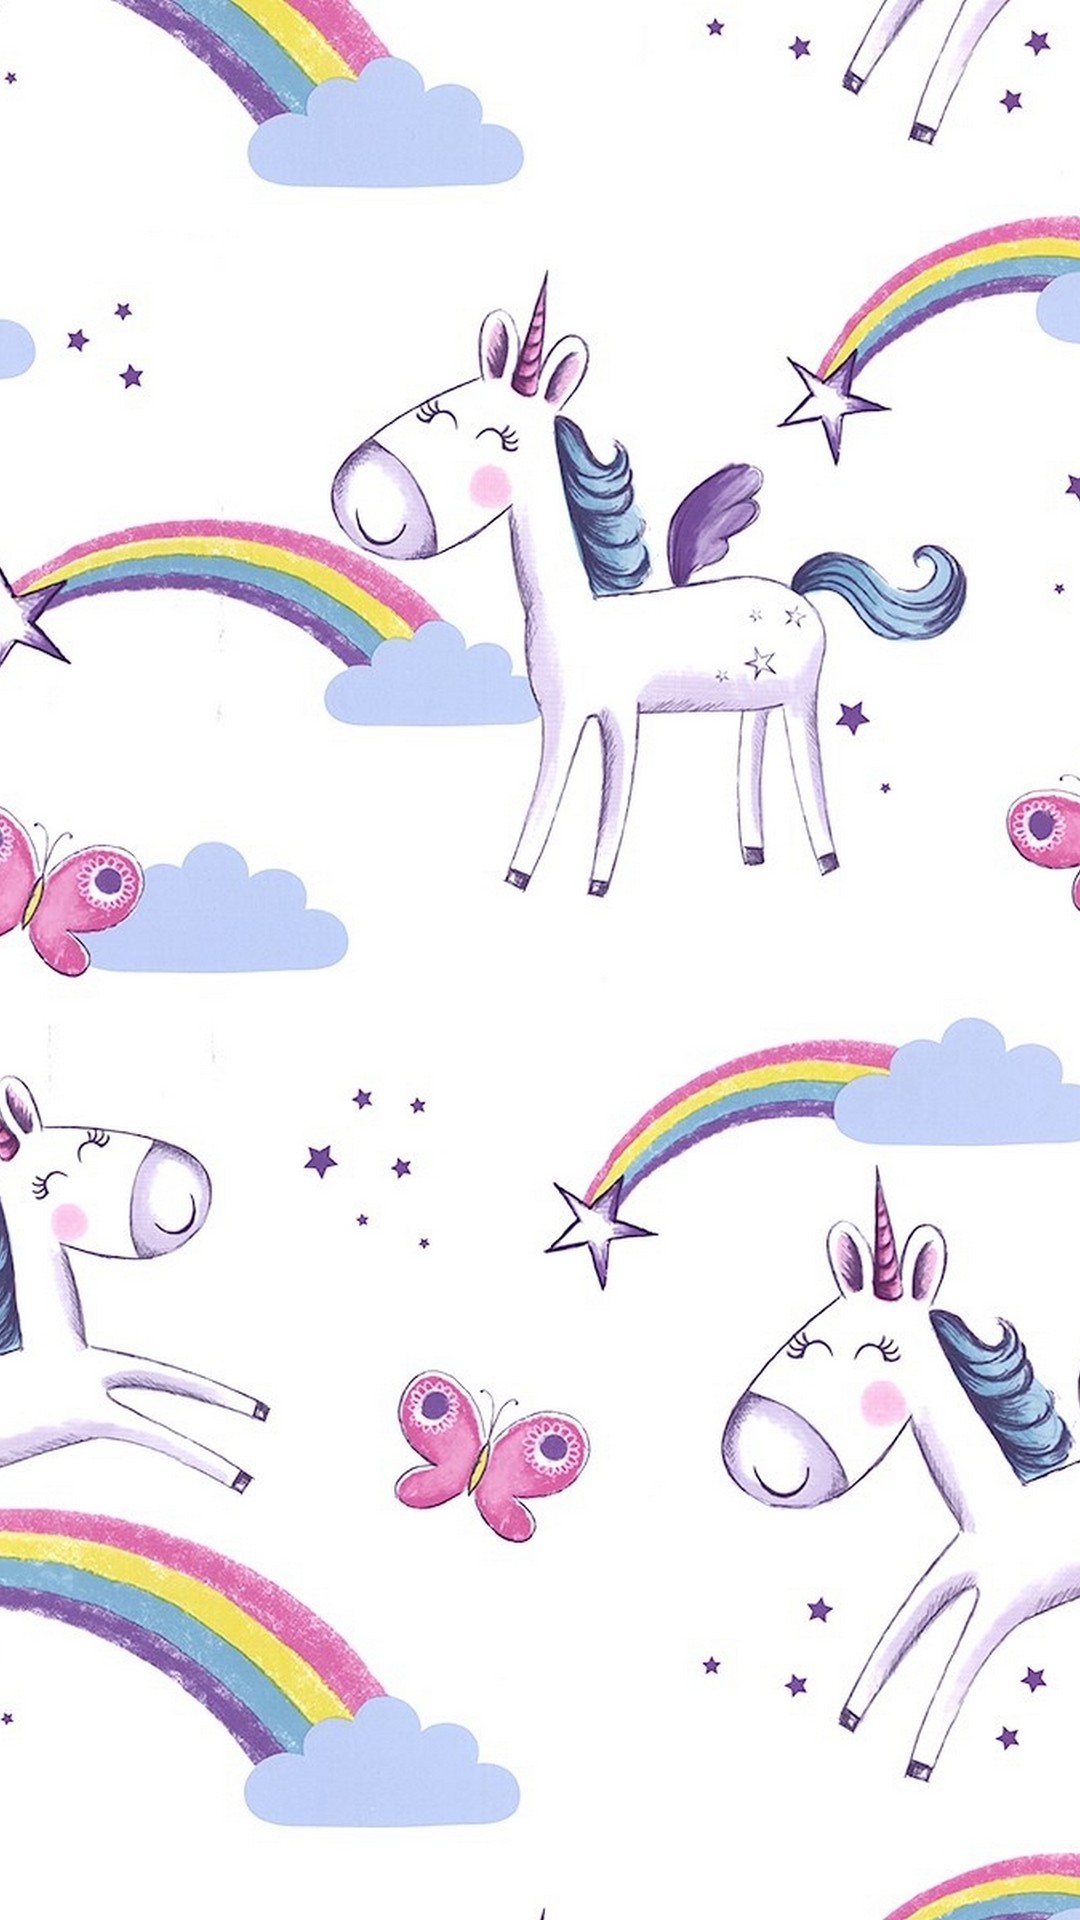 Android Wallpaper Cute Girly Unicorn With high-resolution 1080X1920 pixel. You can use this wallpaper for your Android backgrounds, Tablet, Samsung Screensavers, Mobile Phone Lock Screen and another Smartphones device